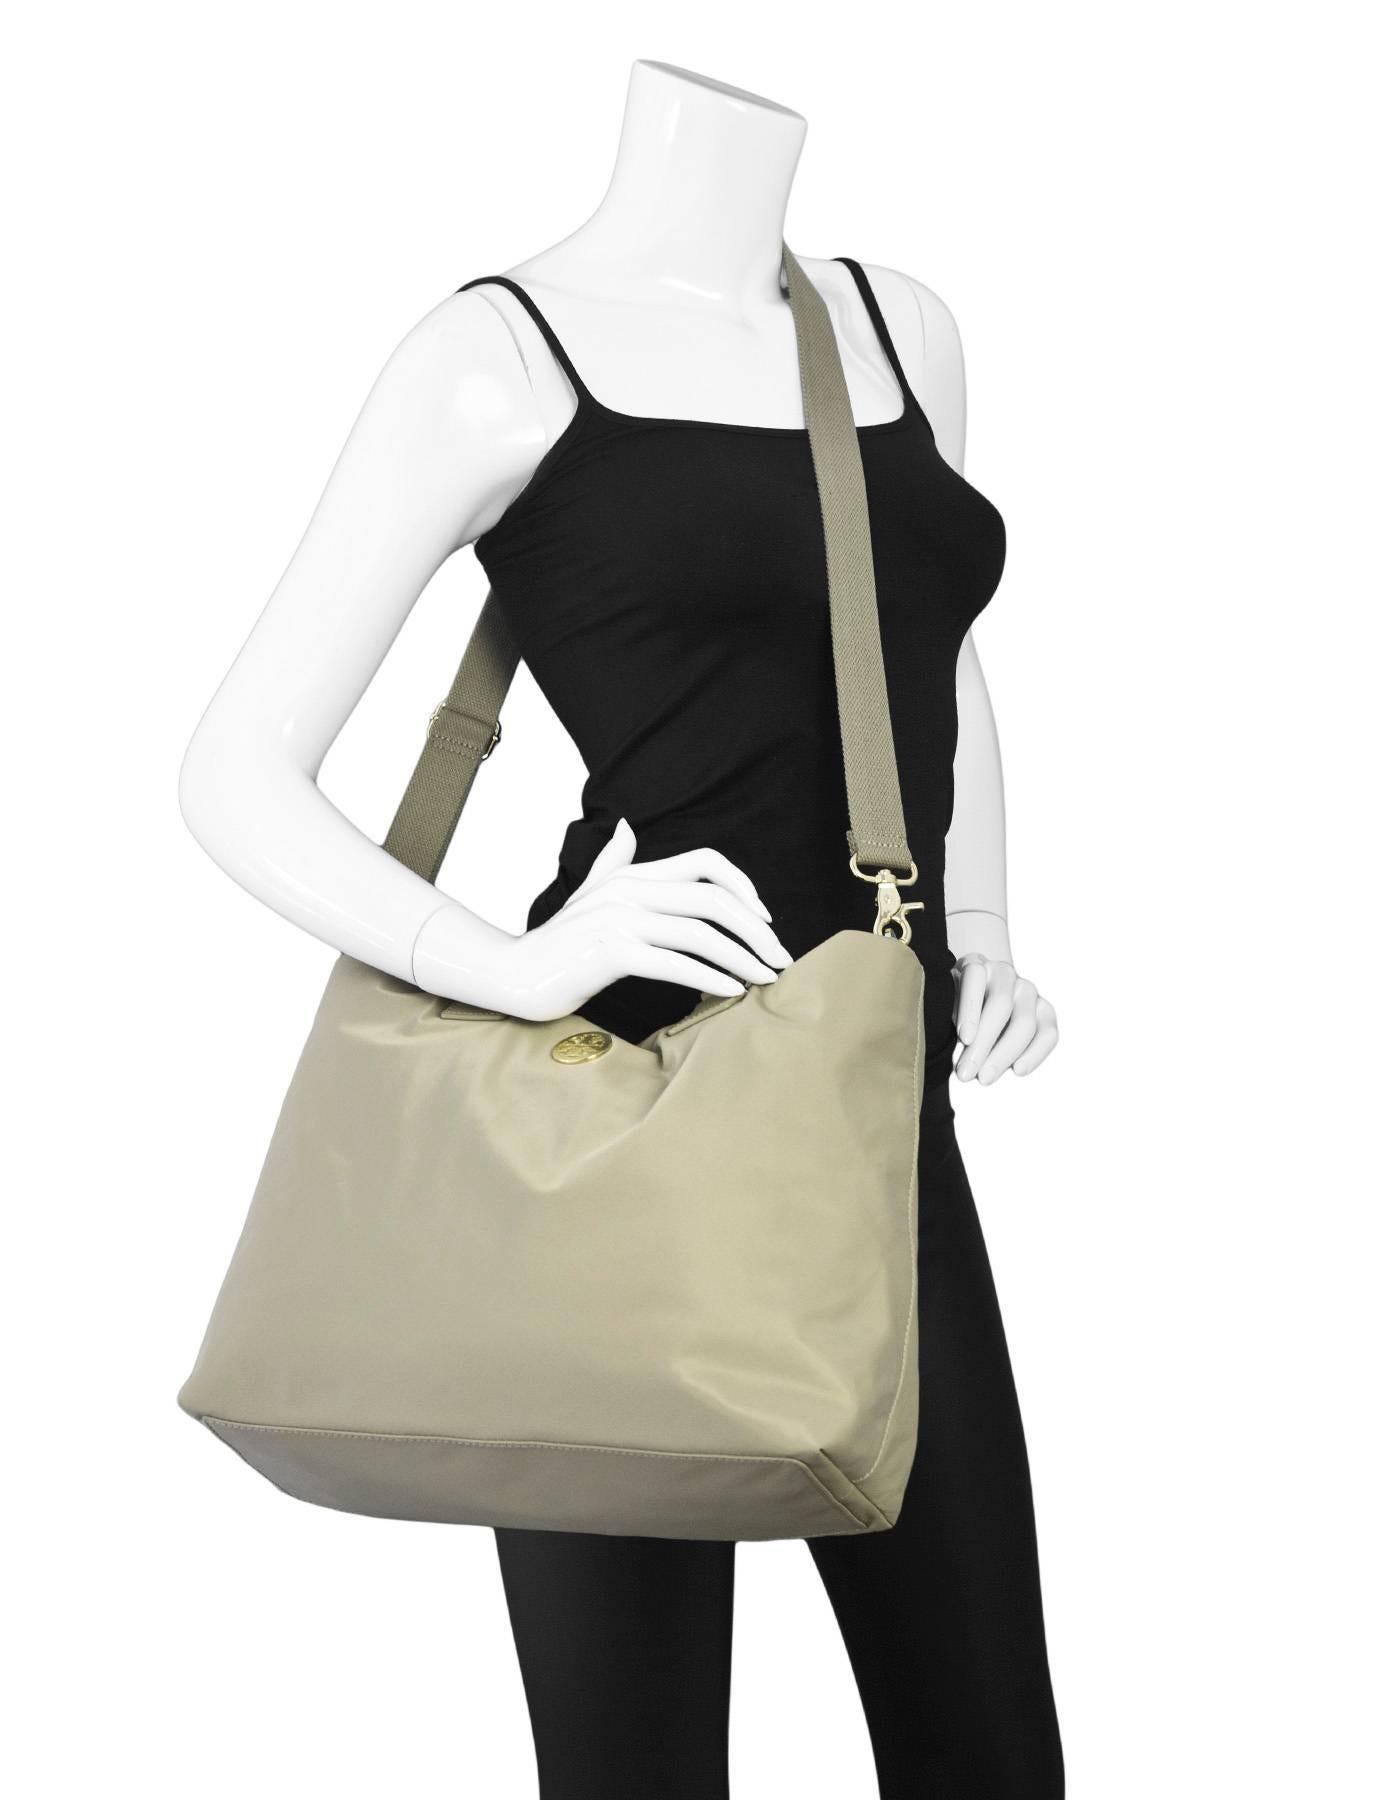 Tory Burch Beige Nylon Dene Bag

Made In: China
Color: Beige
Hardware: Goldtone
Materials: Nylon
Lining: Beige textile
Closure/Opening: Center magnetic snap
Exterior Pockets: None
Interior Pockets: One zipper pocket and two patch pocket
Retail